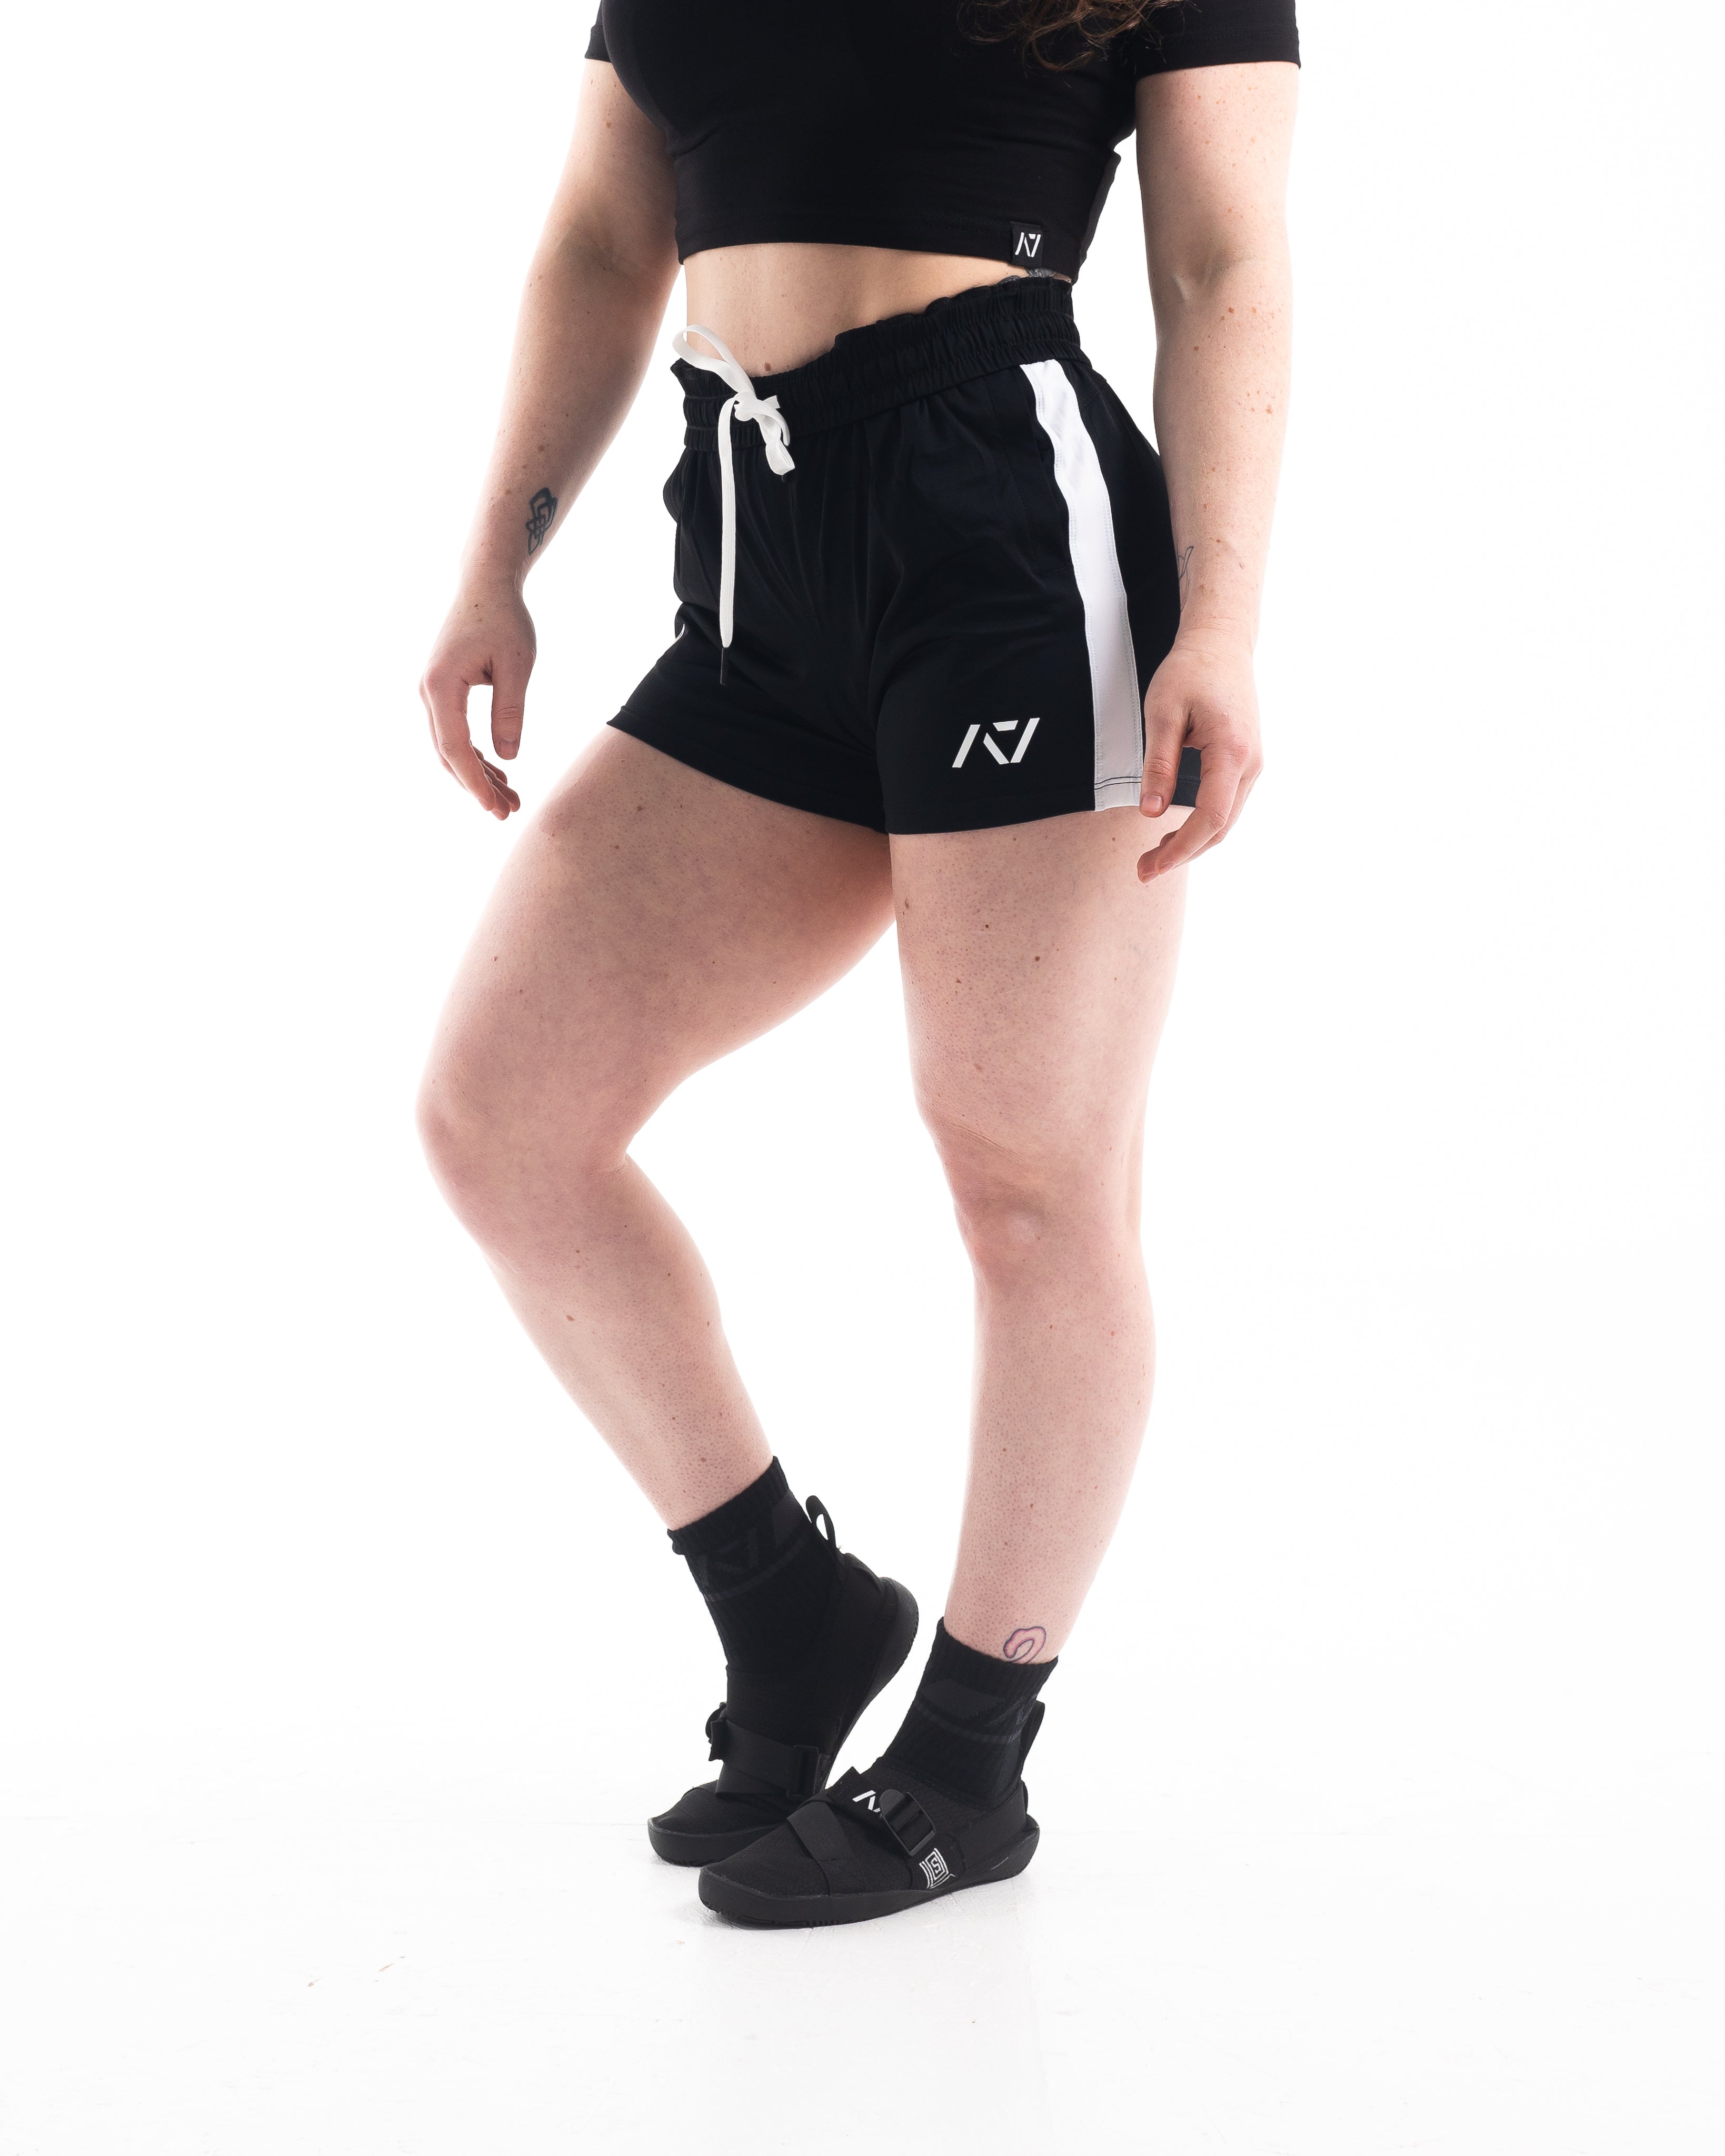 360GO was created to provide the flexibility for all movements in your training while offering comfort. These shorts offer 360 degrees of stretch in all angles and allow you to remain comfortable without limiting any movement in both training and life environments. Designed with a wide drawstring to easily adjust your waist without slipping. Purchase 360GO Domino Squat Shorts from A7 UK. All A7 Powerlifting Equipment shipping to UK, Norway, Switzerland and Iceland.